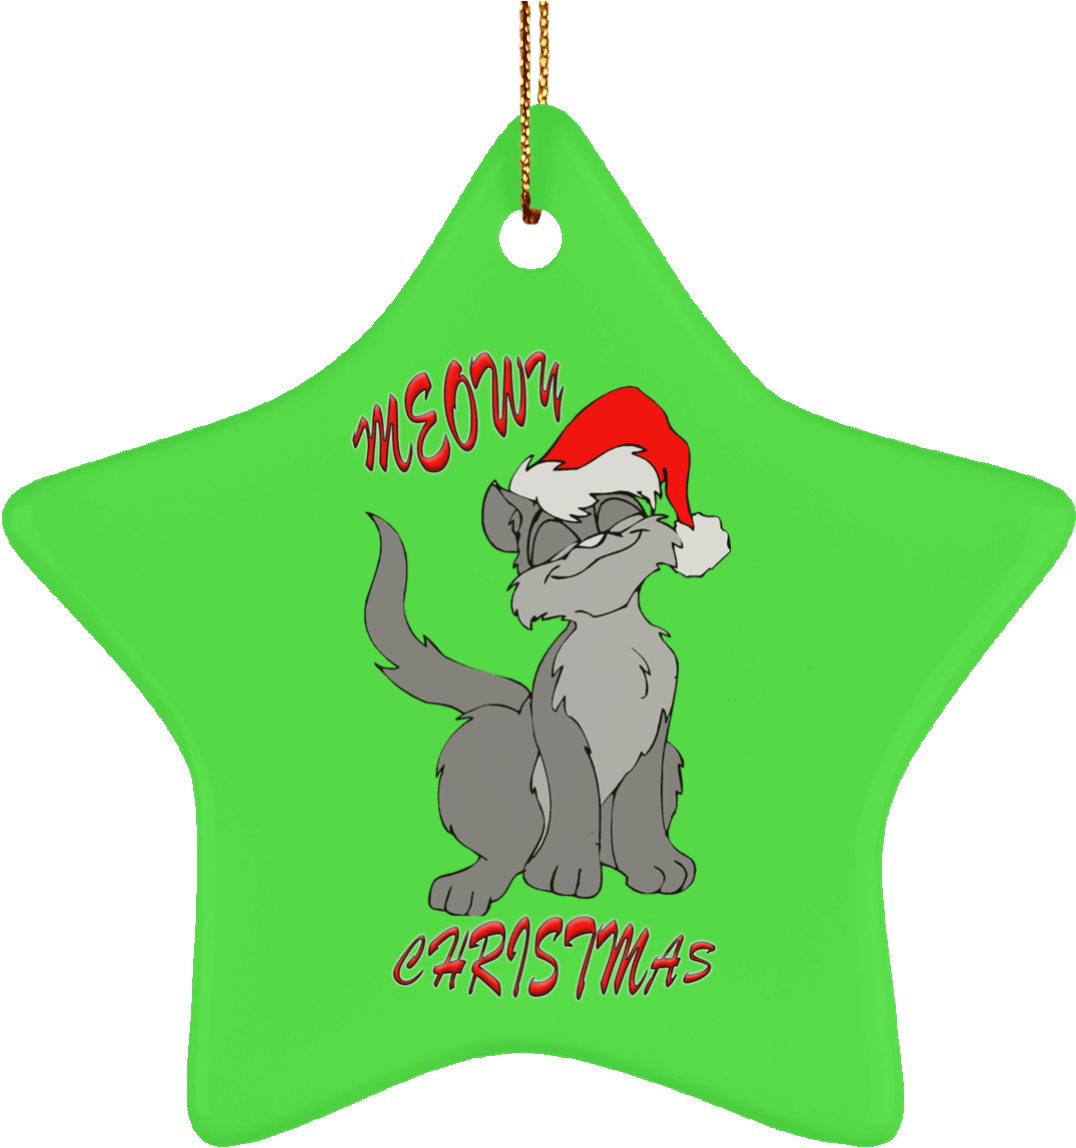 Meowy Cat Christmas Tree Ornament Green Round Oval - Christmas Ornament (1155x1155)